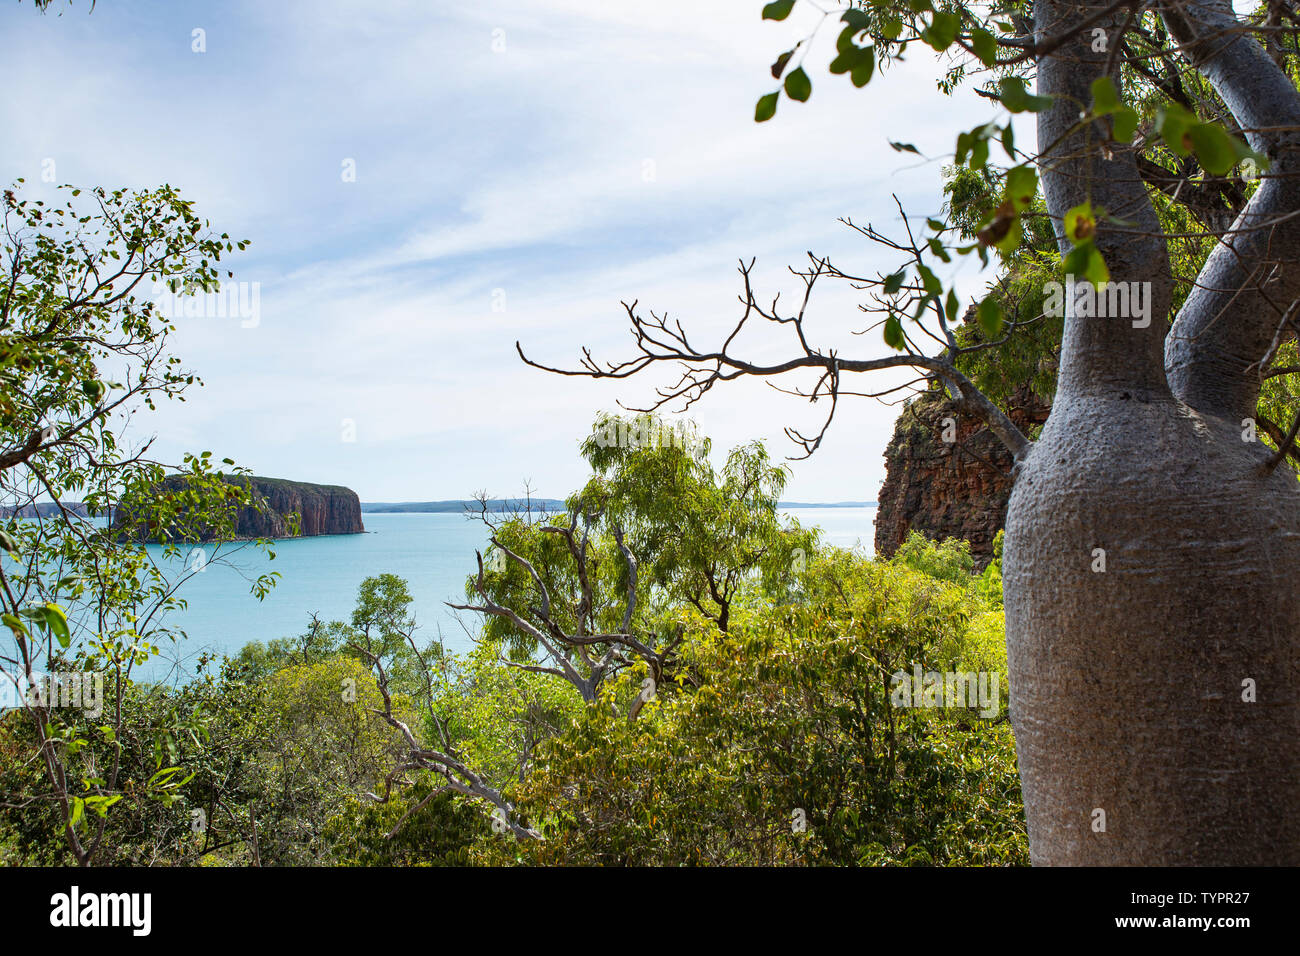 coastline of  the region Kimberley in Western Australia with lush bushes and a Baobab tree in the foreground Stock Photo